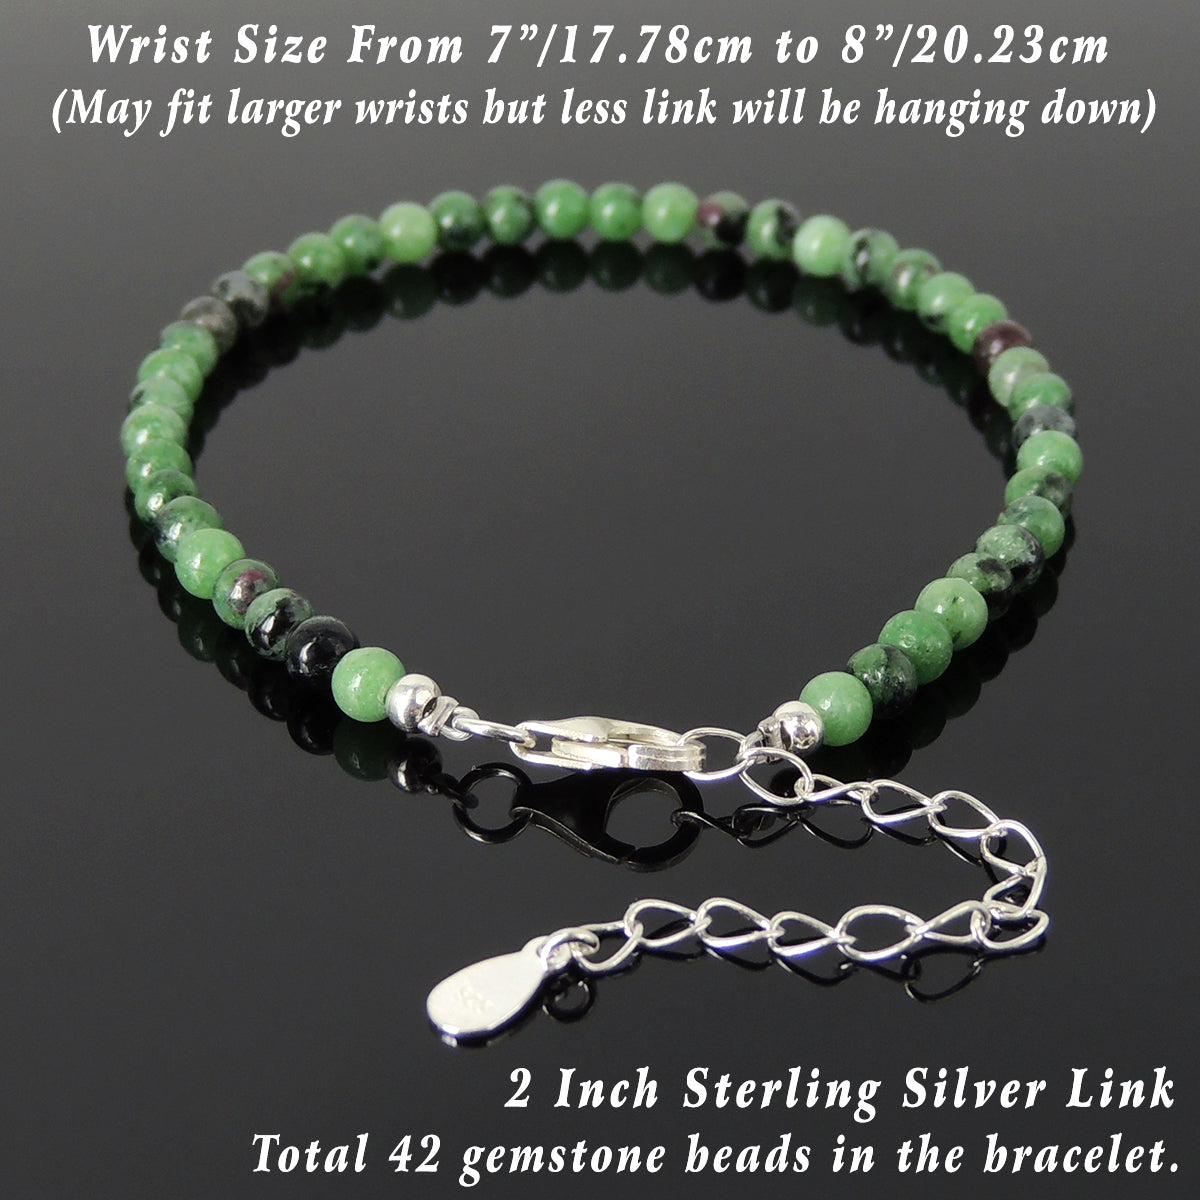 4mm Epidote Healing Gemstone Bracelet with S925 Sterling Silver Beads, Chain, & Clasp - Handmade by Gem & Silver BR1343